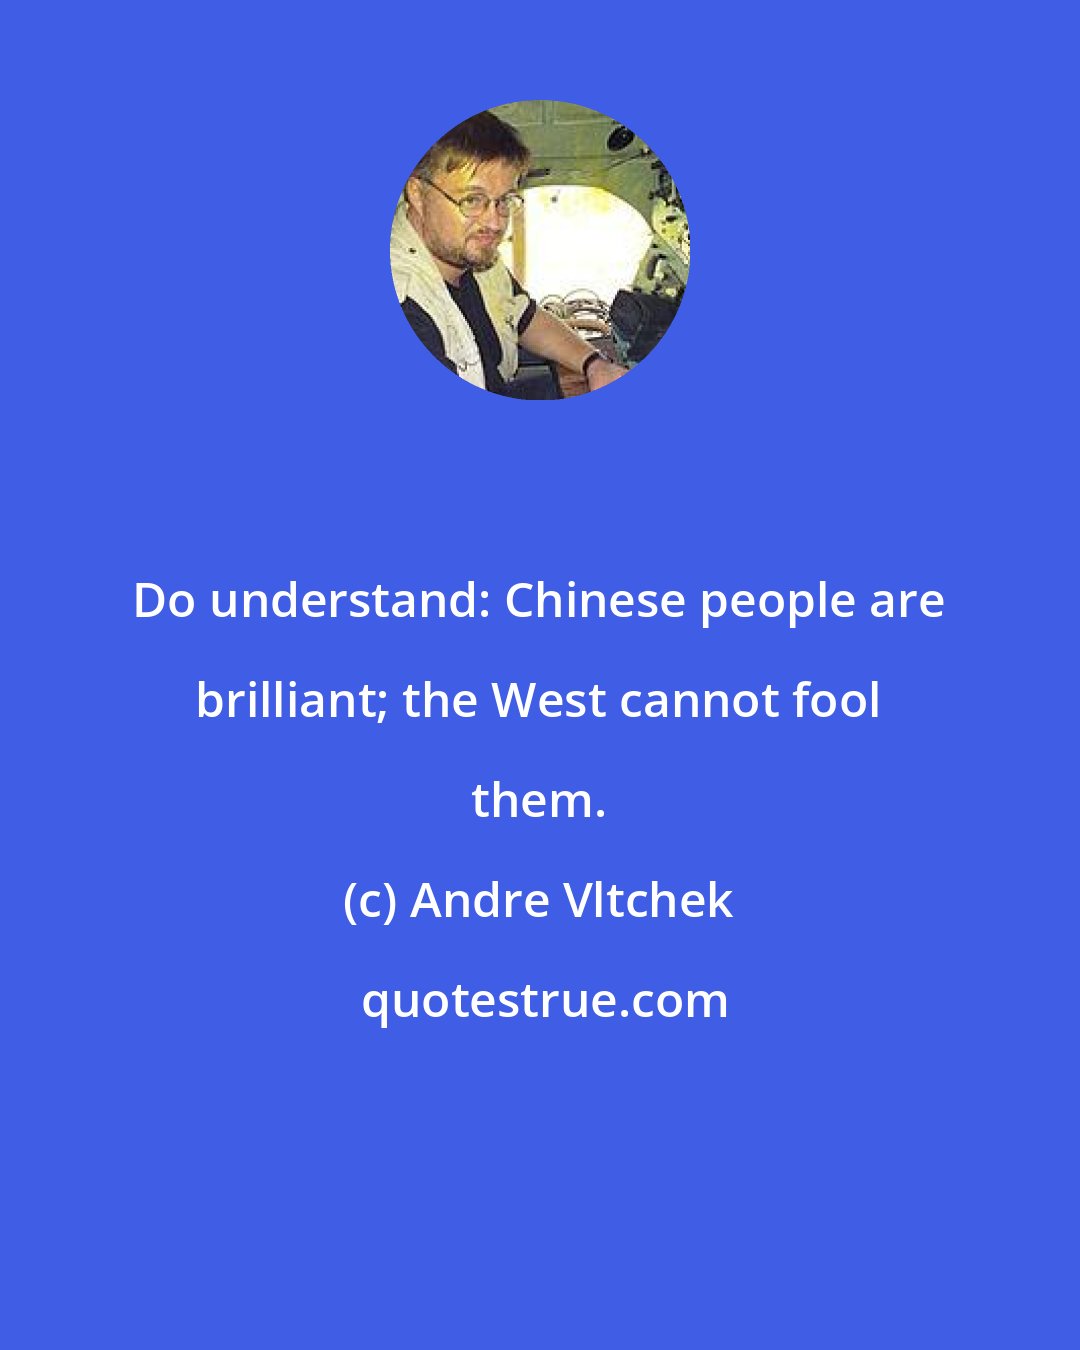 Andre Vltchek: Do understand: Chinese people are brilliant; the West cannot fool them.